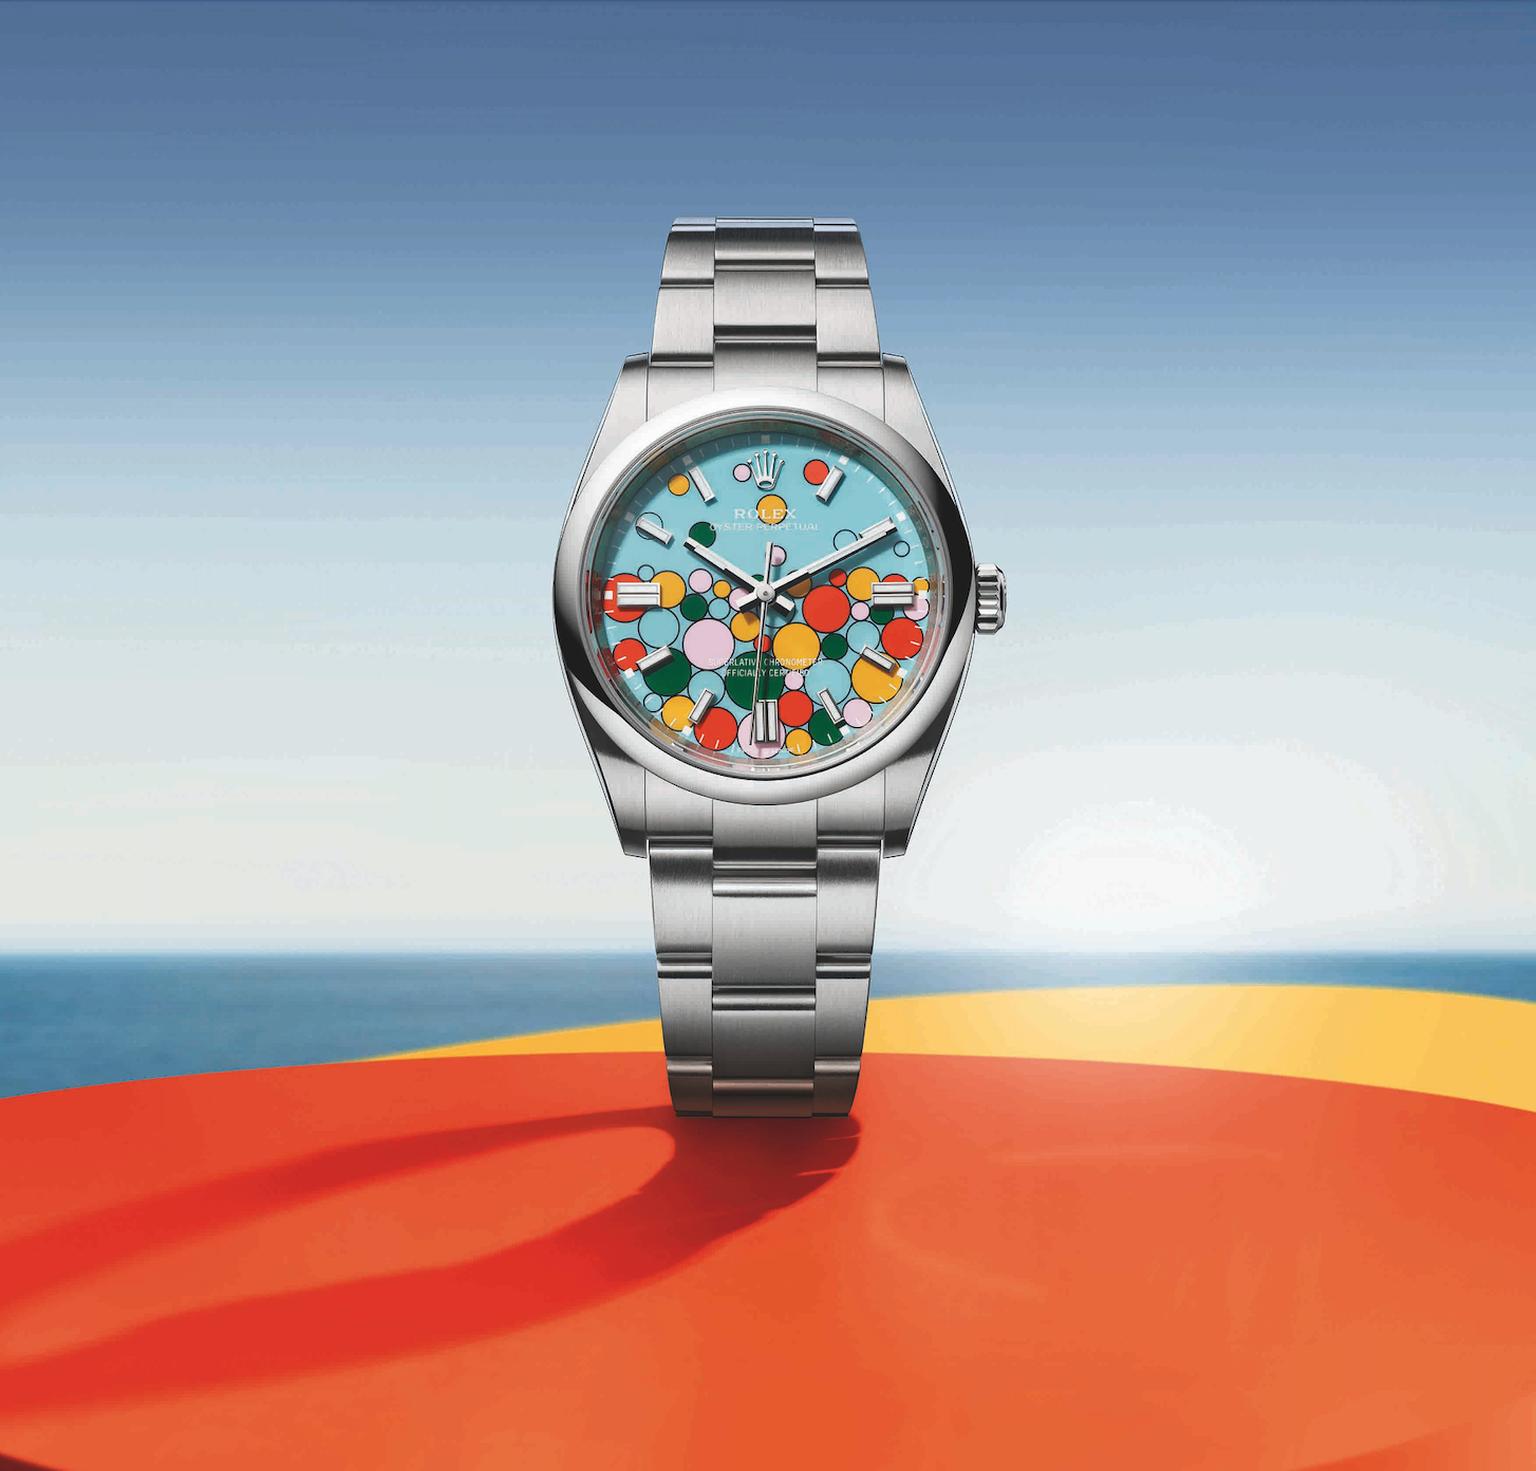 Takashi Murakami's iconic smiling flowers have been transformed into a  collectable timepiece